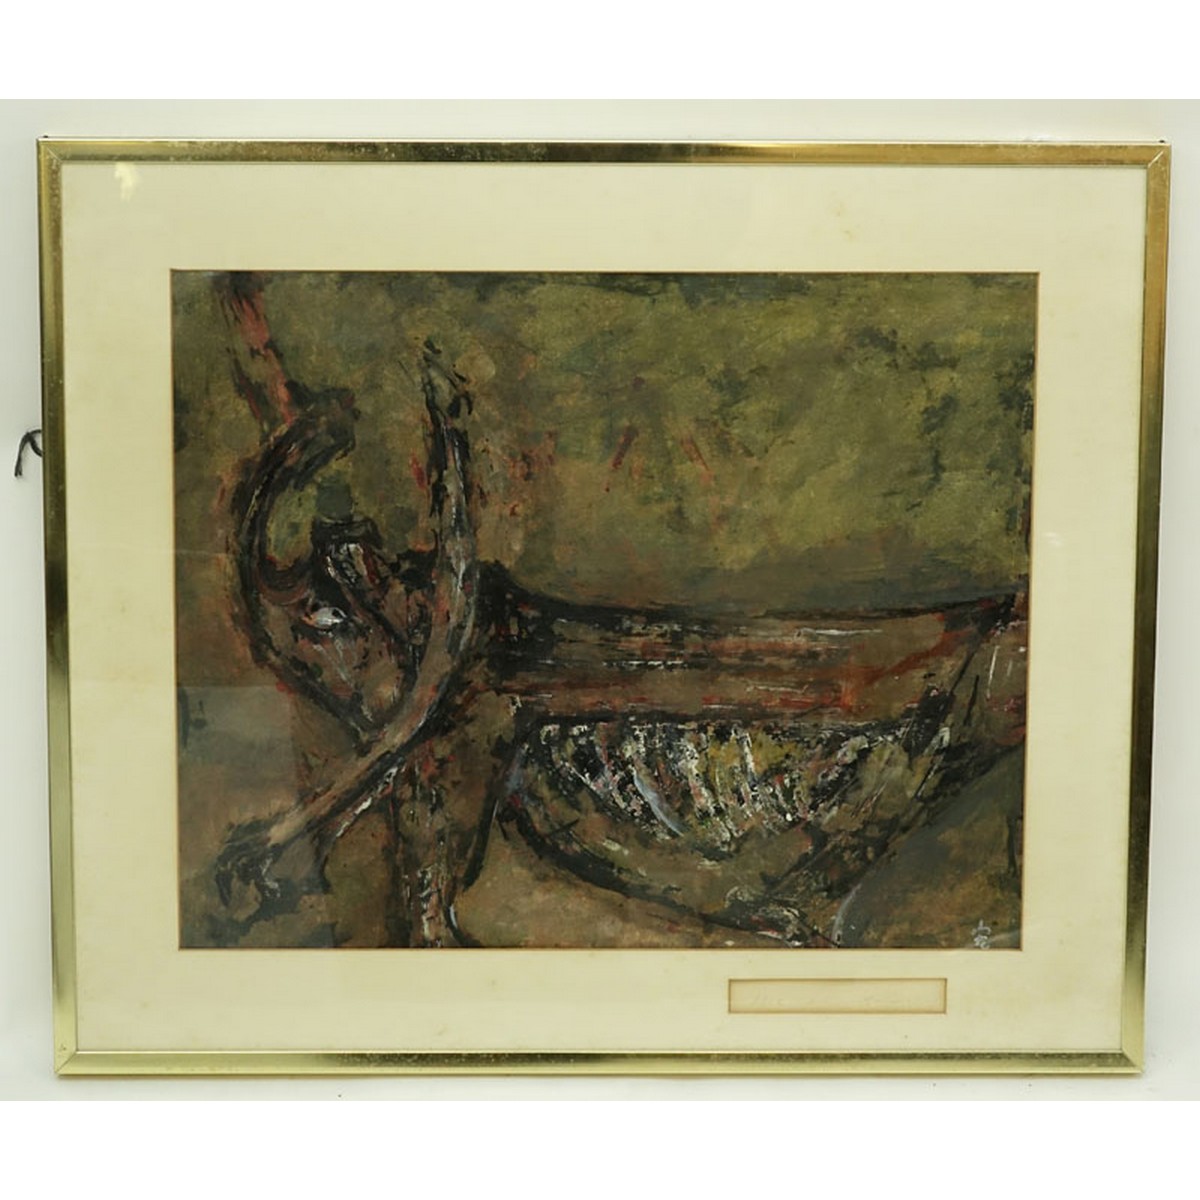 20th Century Chinese Gouache on Paper, Abstract Composition, Signed Lower Right. Inscribed at the opening on the matting.